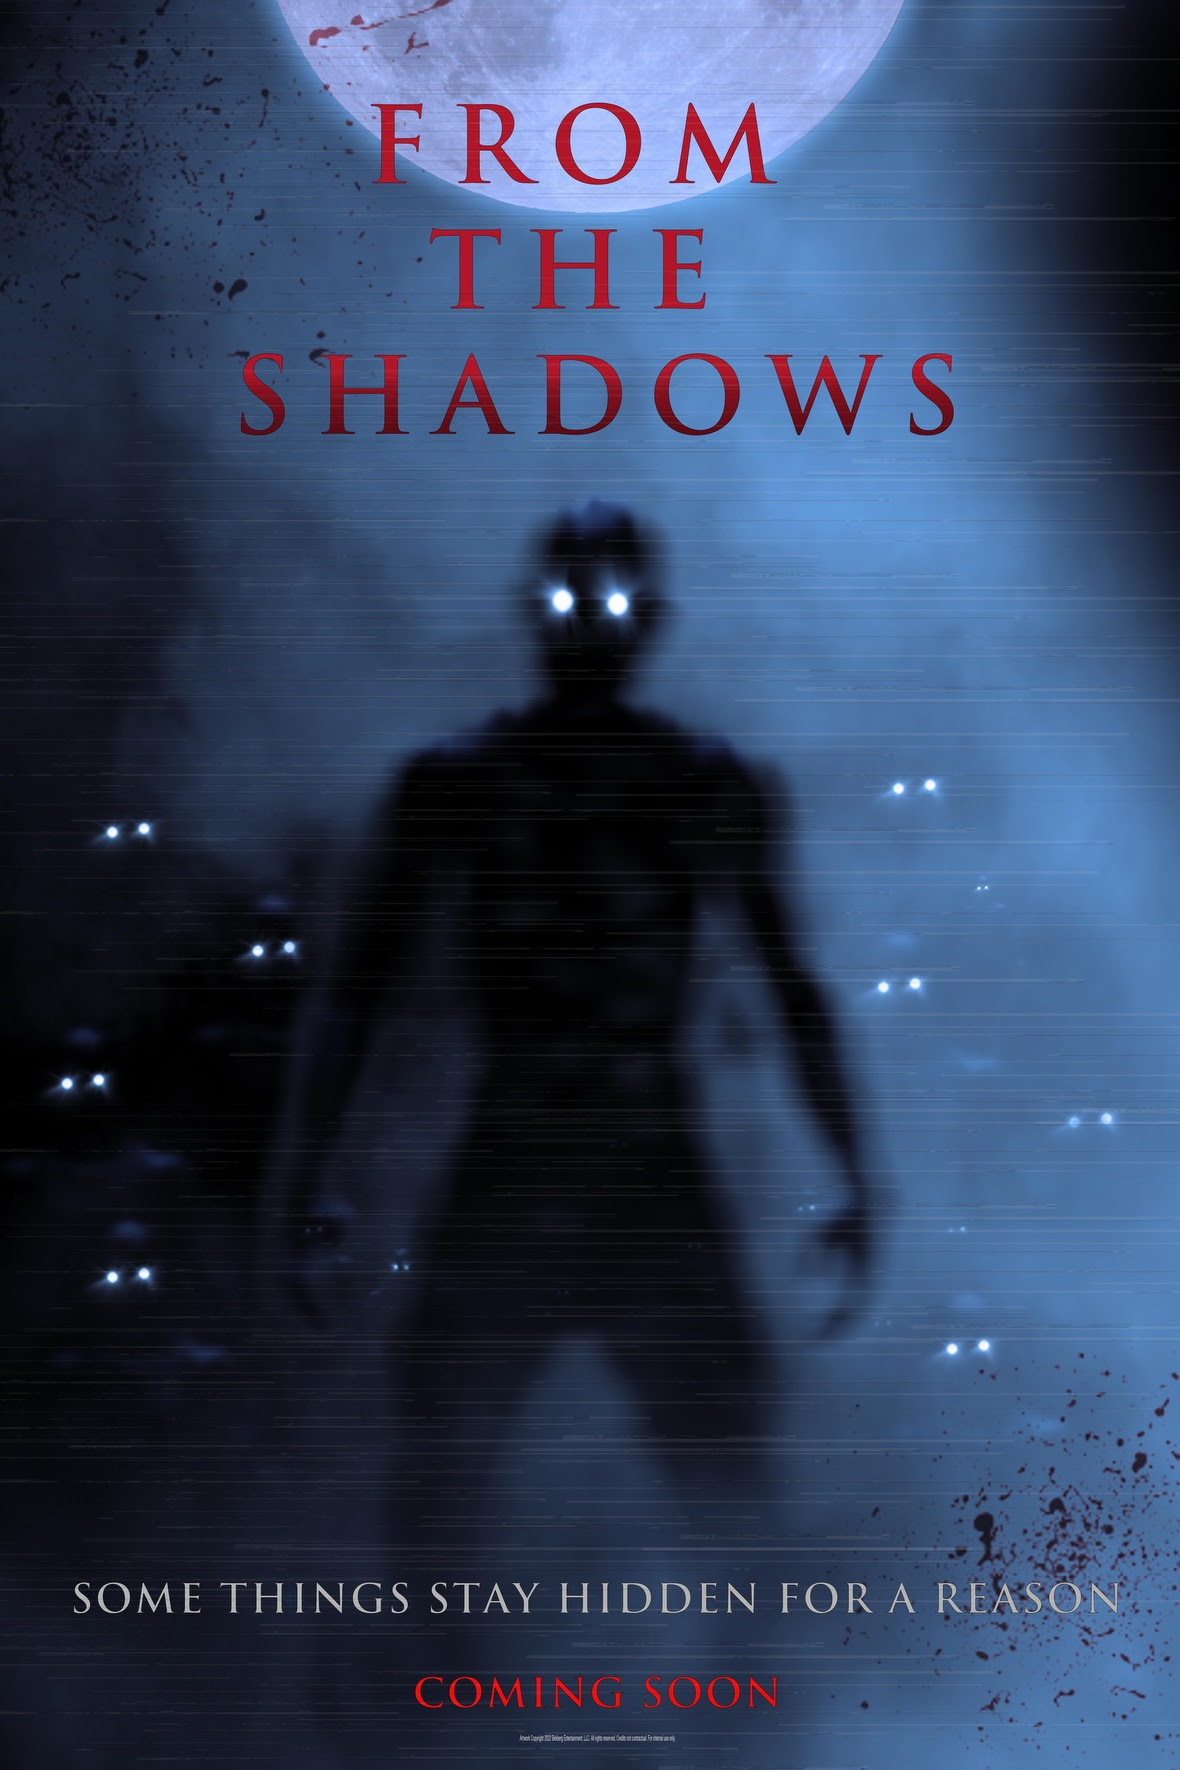 From the Shadows Artwork